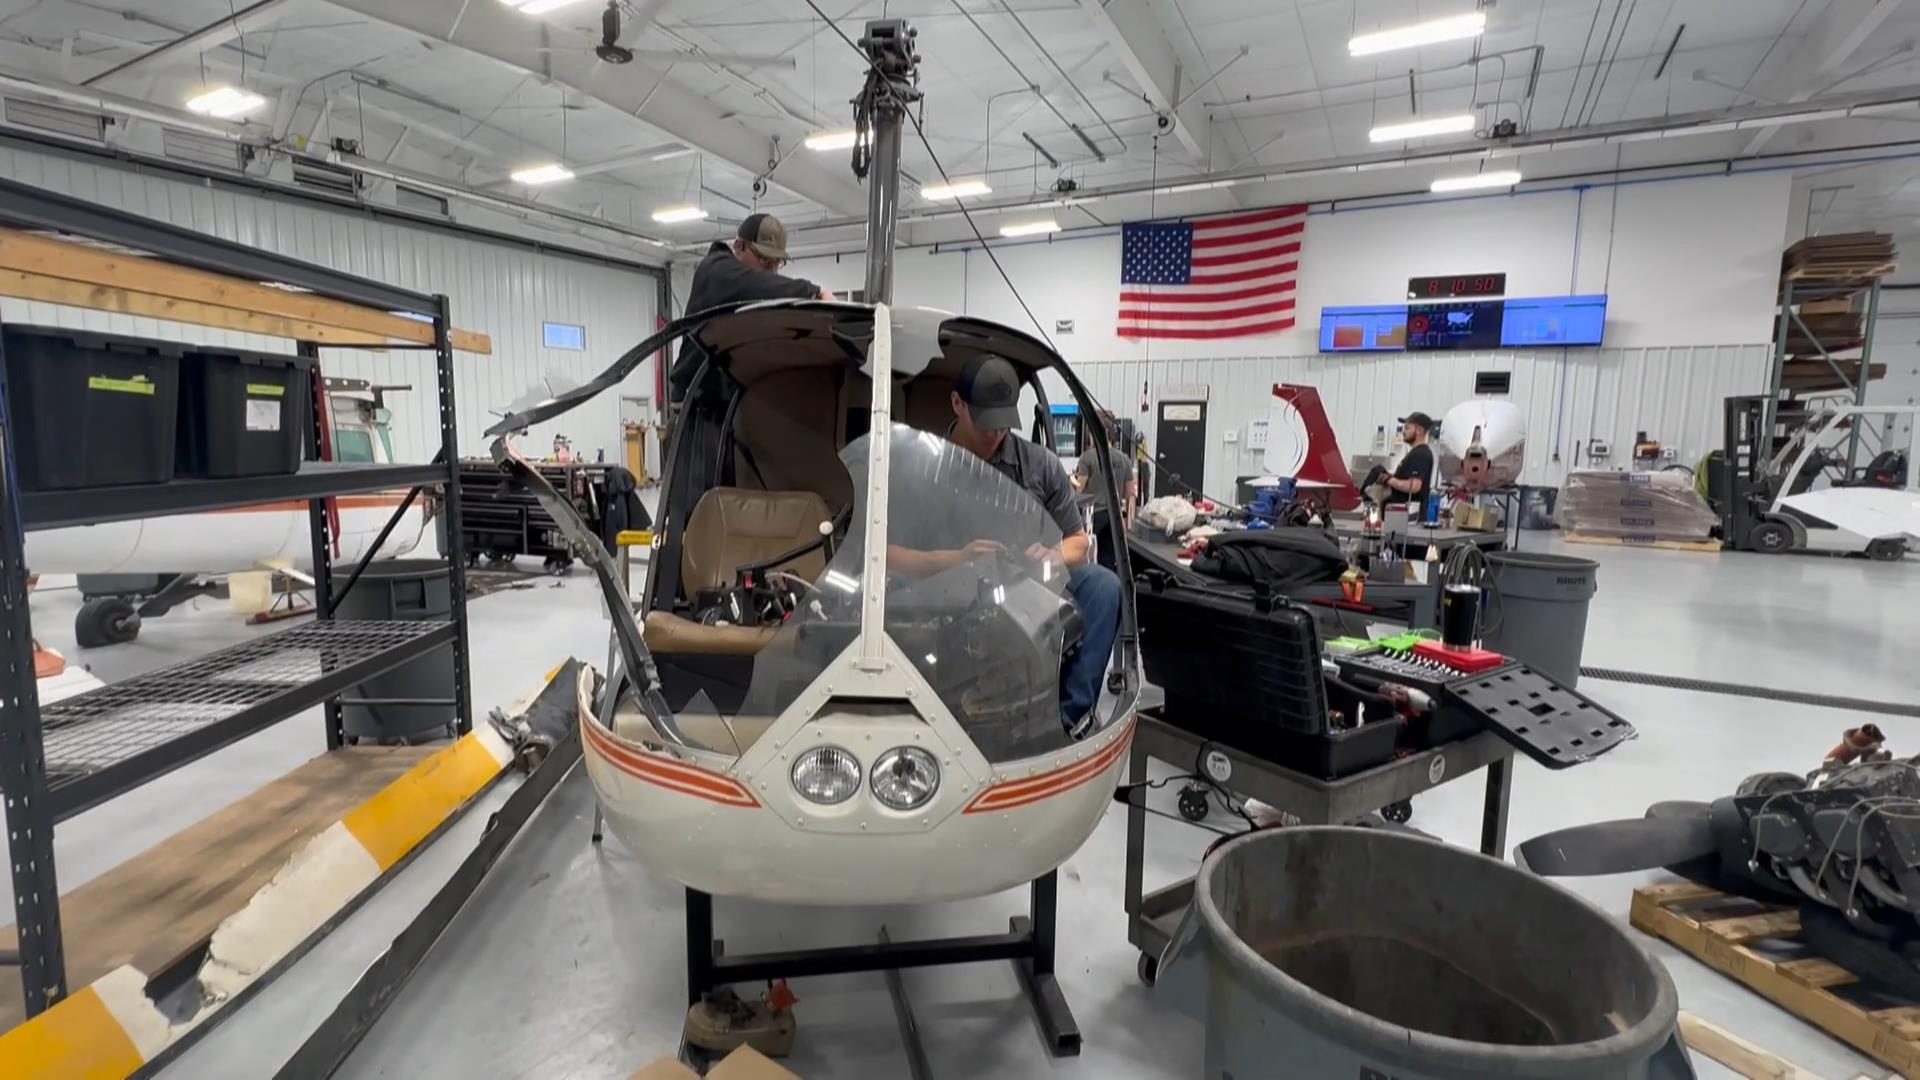 The BAS aviation mechanics disassembling a wrecked Robinson R44 Raven II helicopter